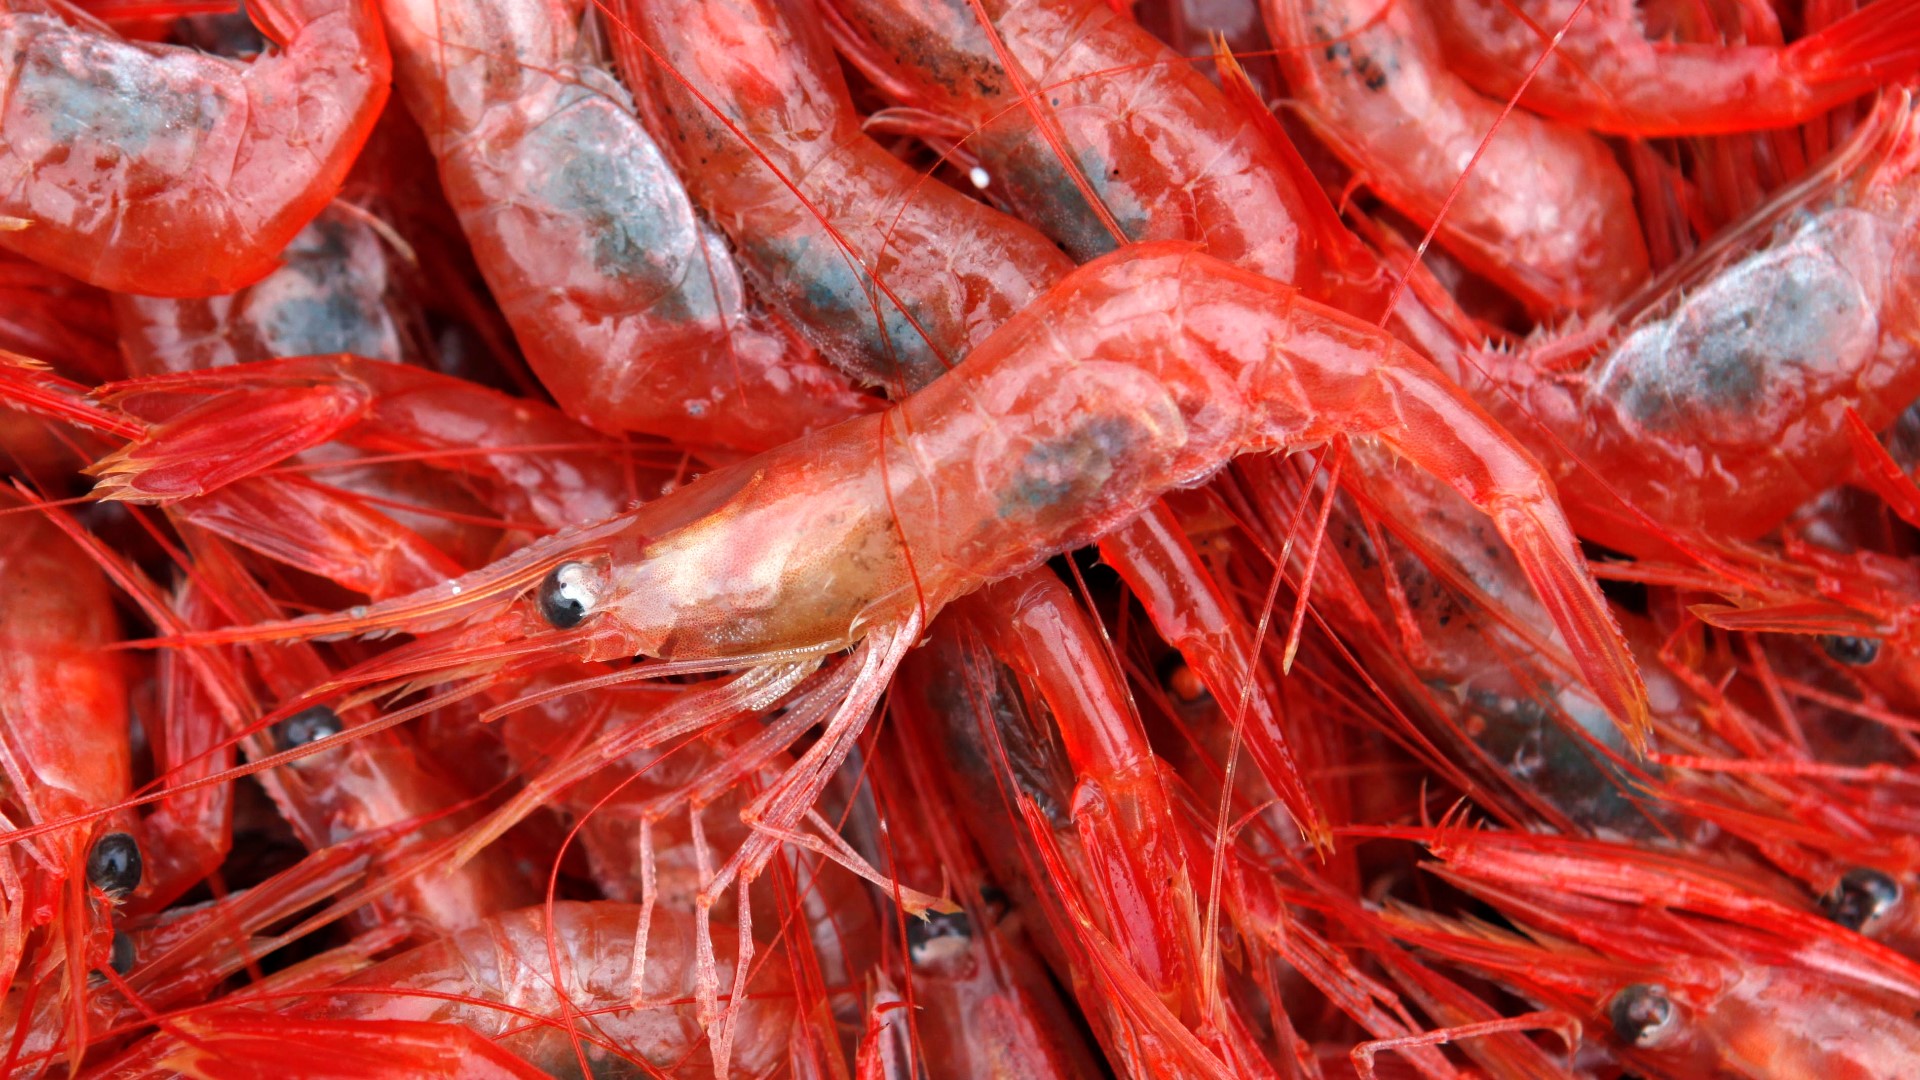 Social media posts and news headlines are claiming that researchers have found cocaine in shrimp. Is it true?